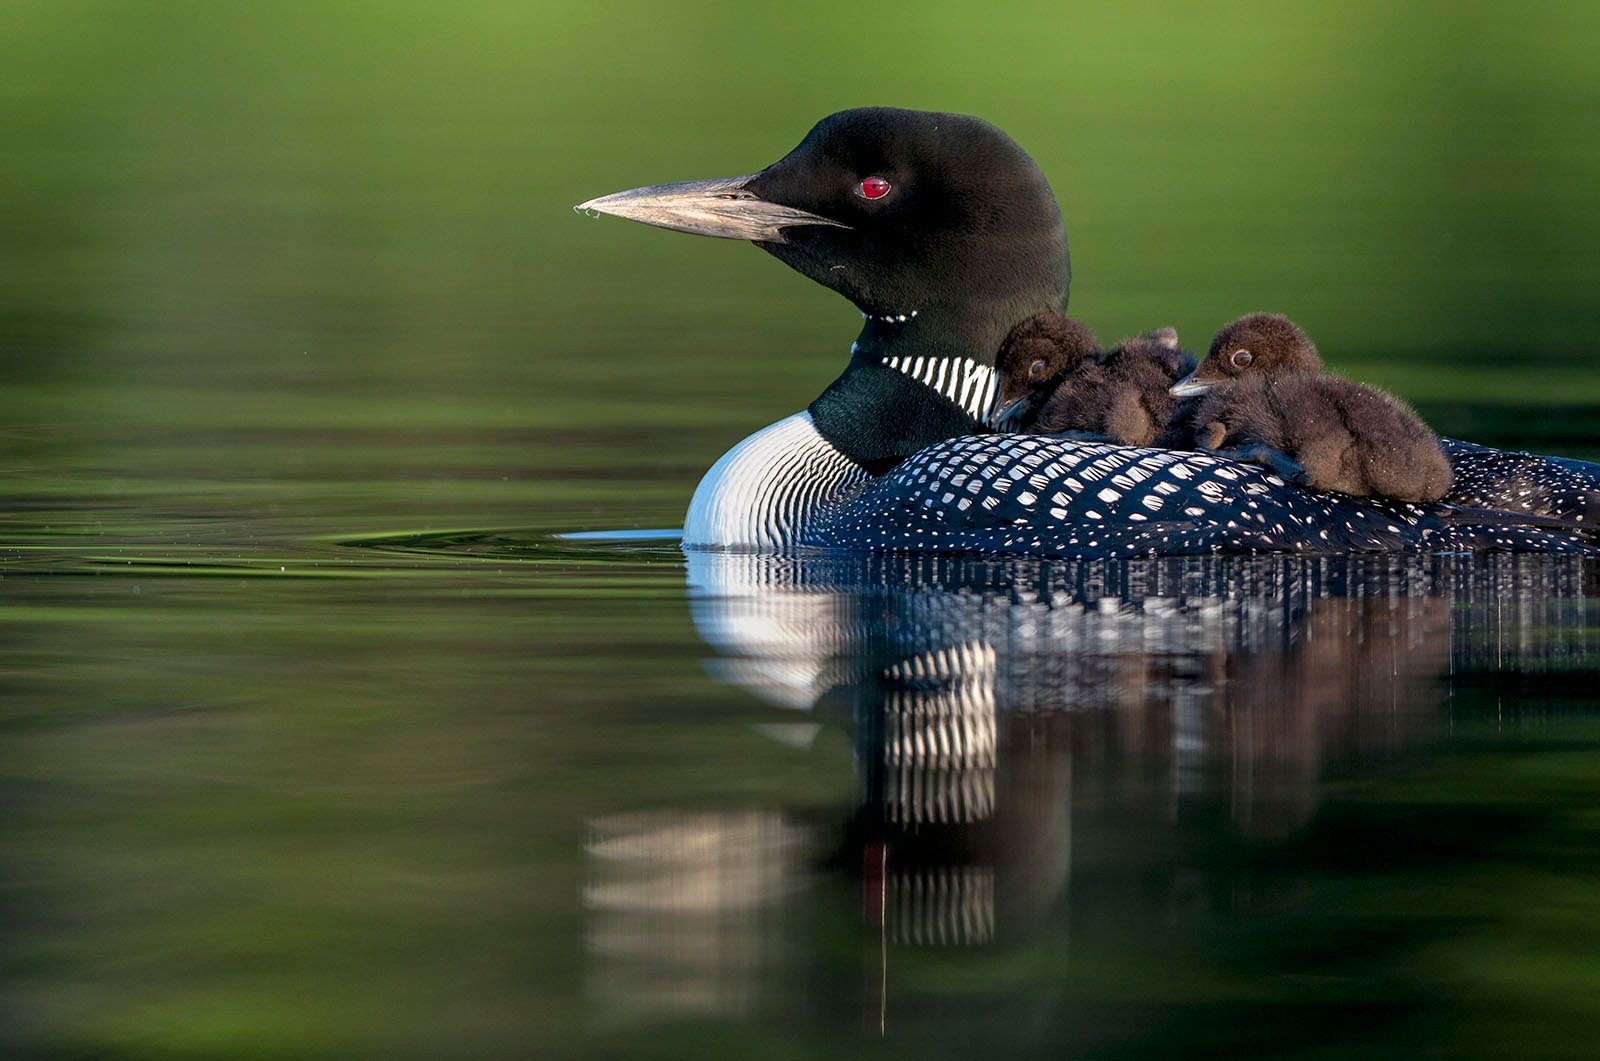 A common loon with a sleek black head and speckled body floats on calm water, carrying two fluffy brown chicks on its back. the bird's distinct red eyes prominently stand out.